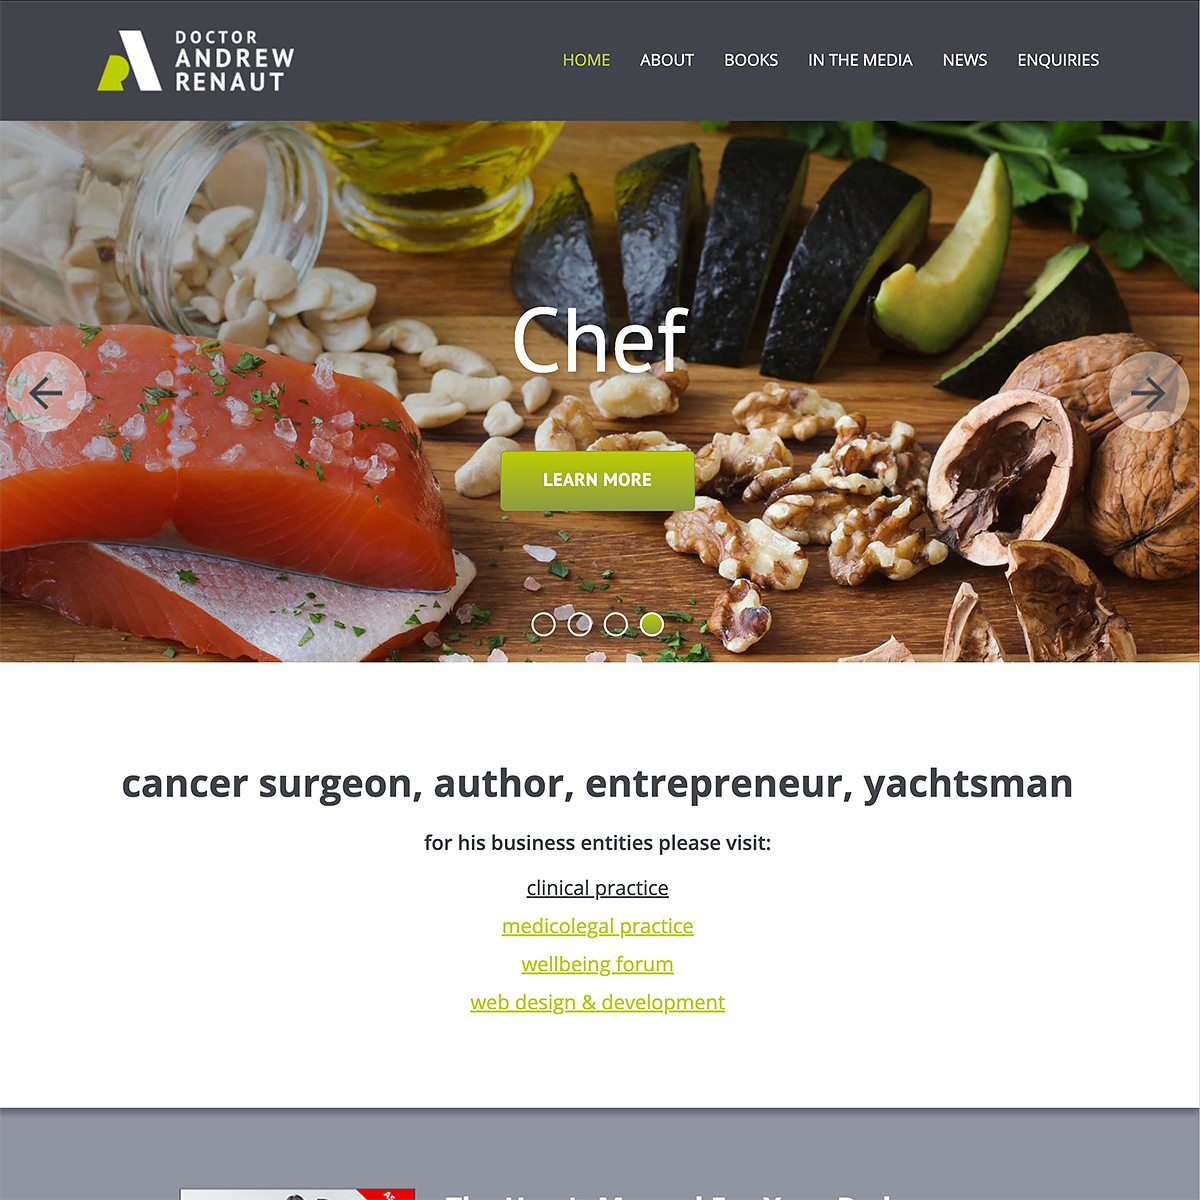 Dr Andrew Renaut - Homepage Banner - Chef